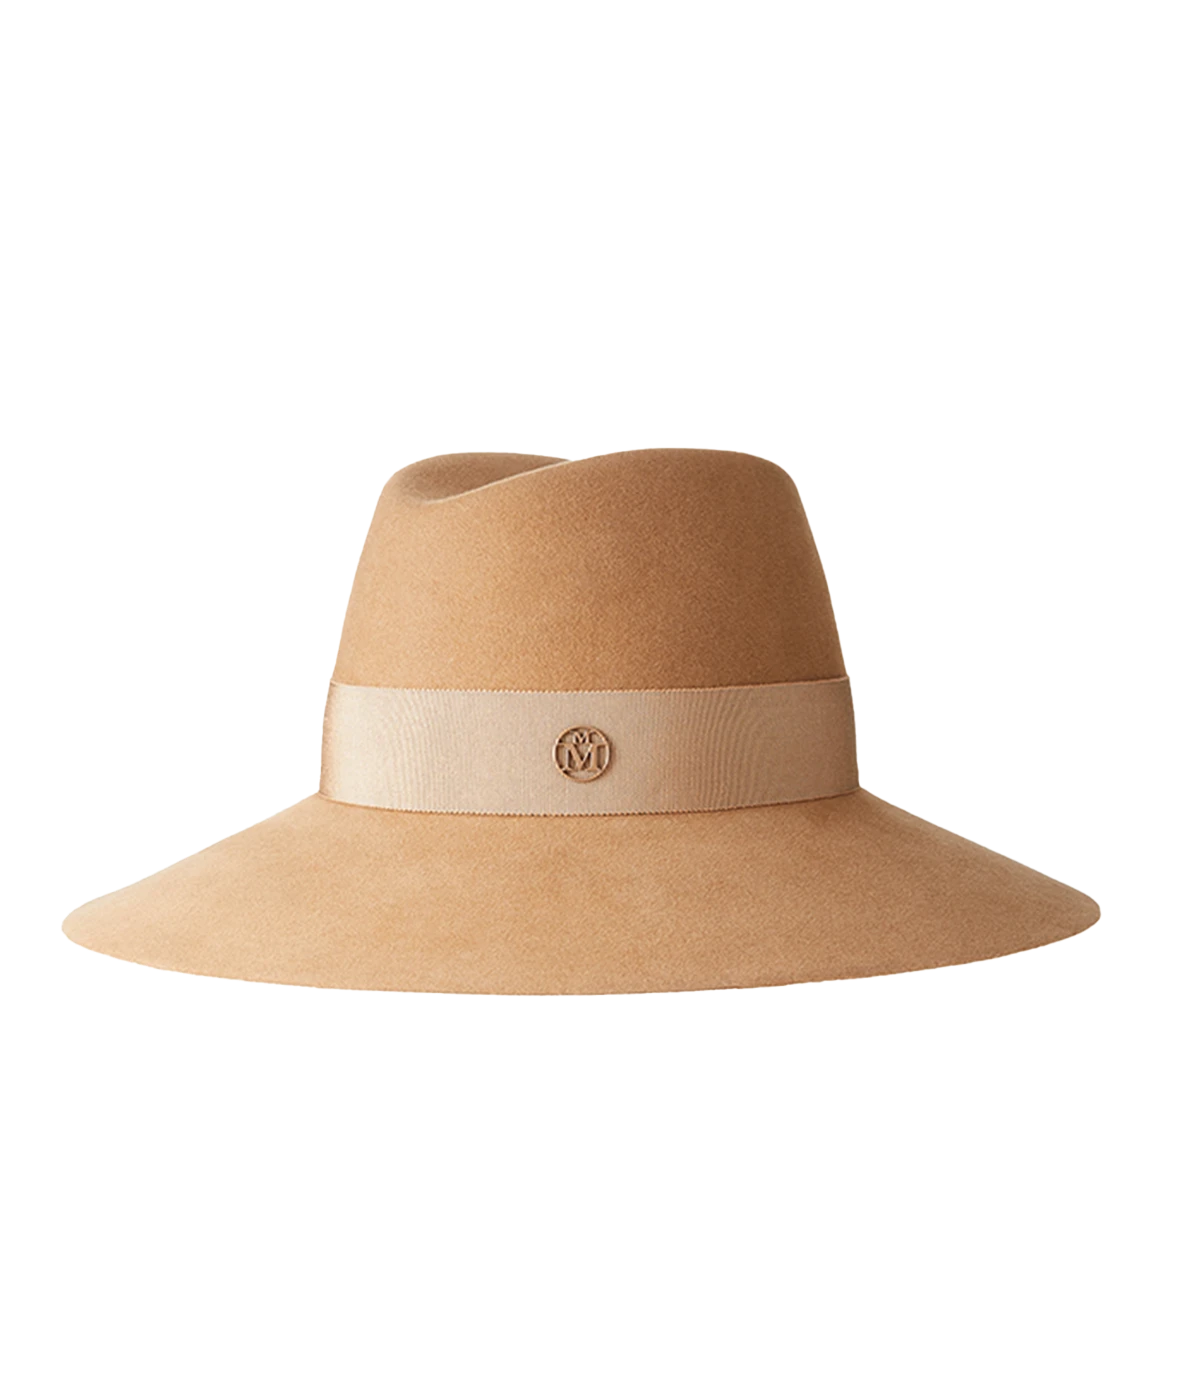 Wool felt waterproof camel fedora hat. Timeless and elegant accessory to add style to any look. 